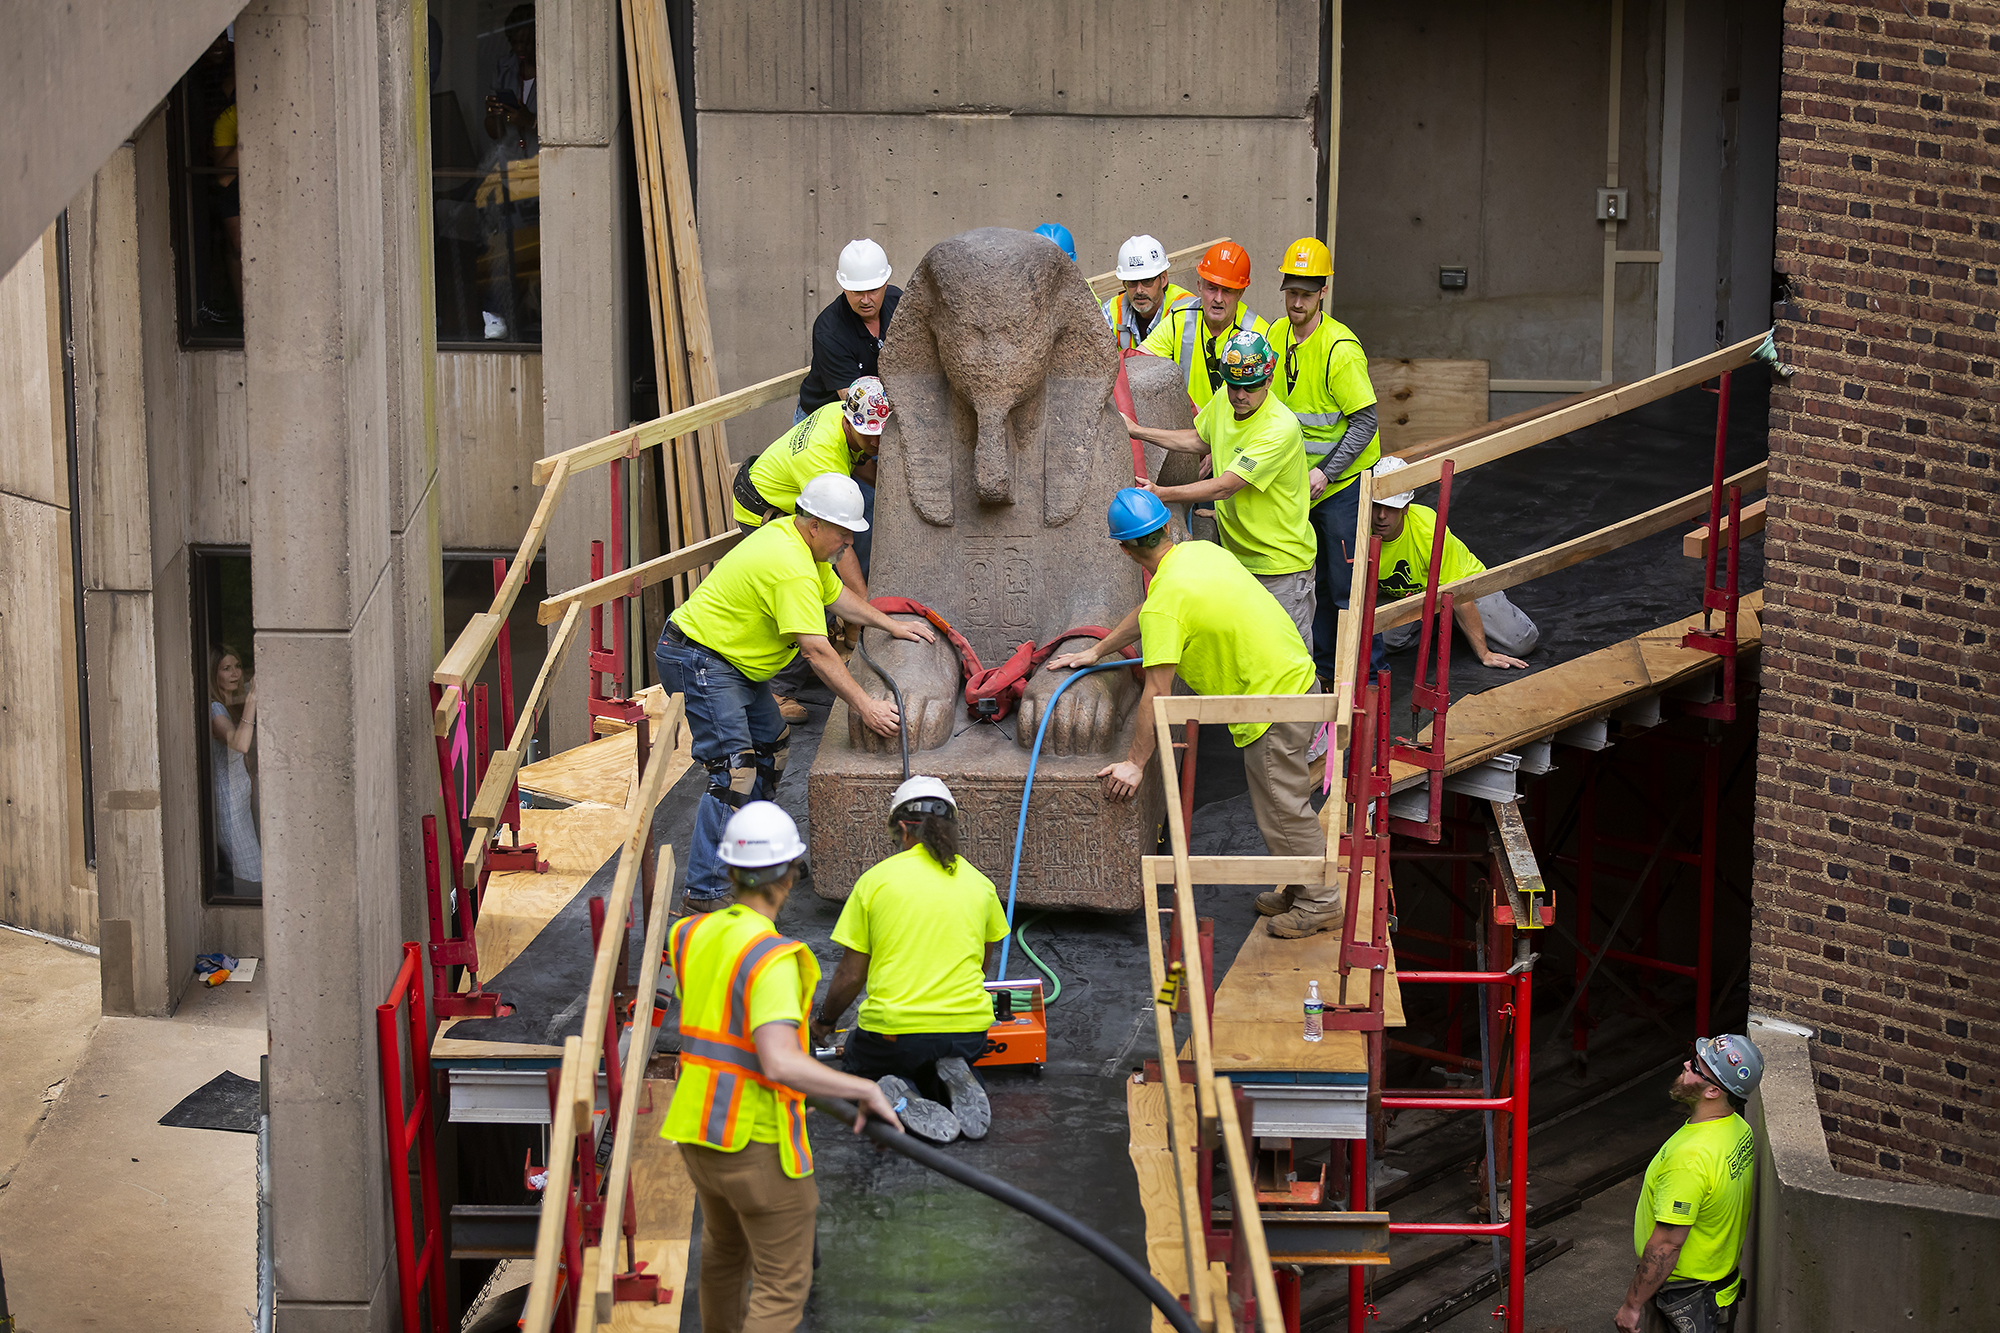 sphinx being moved by several people on a ramp